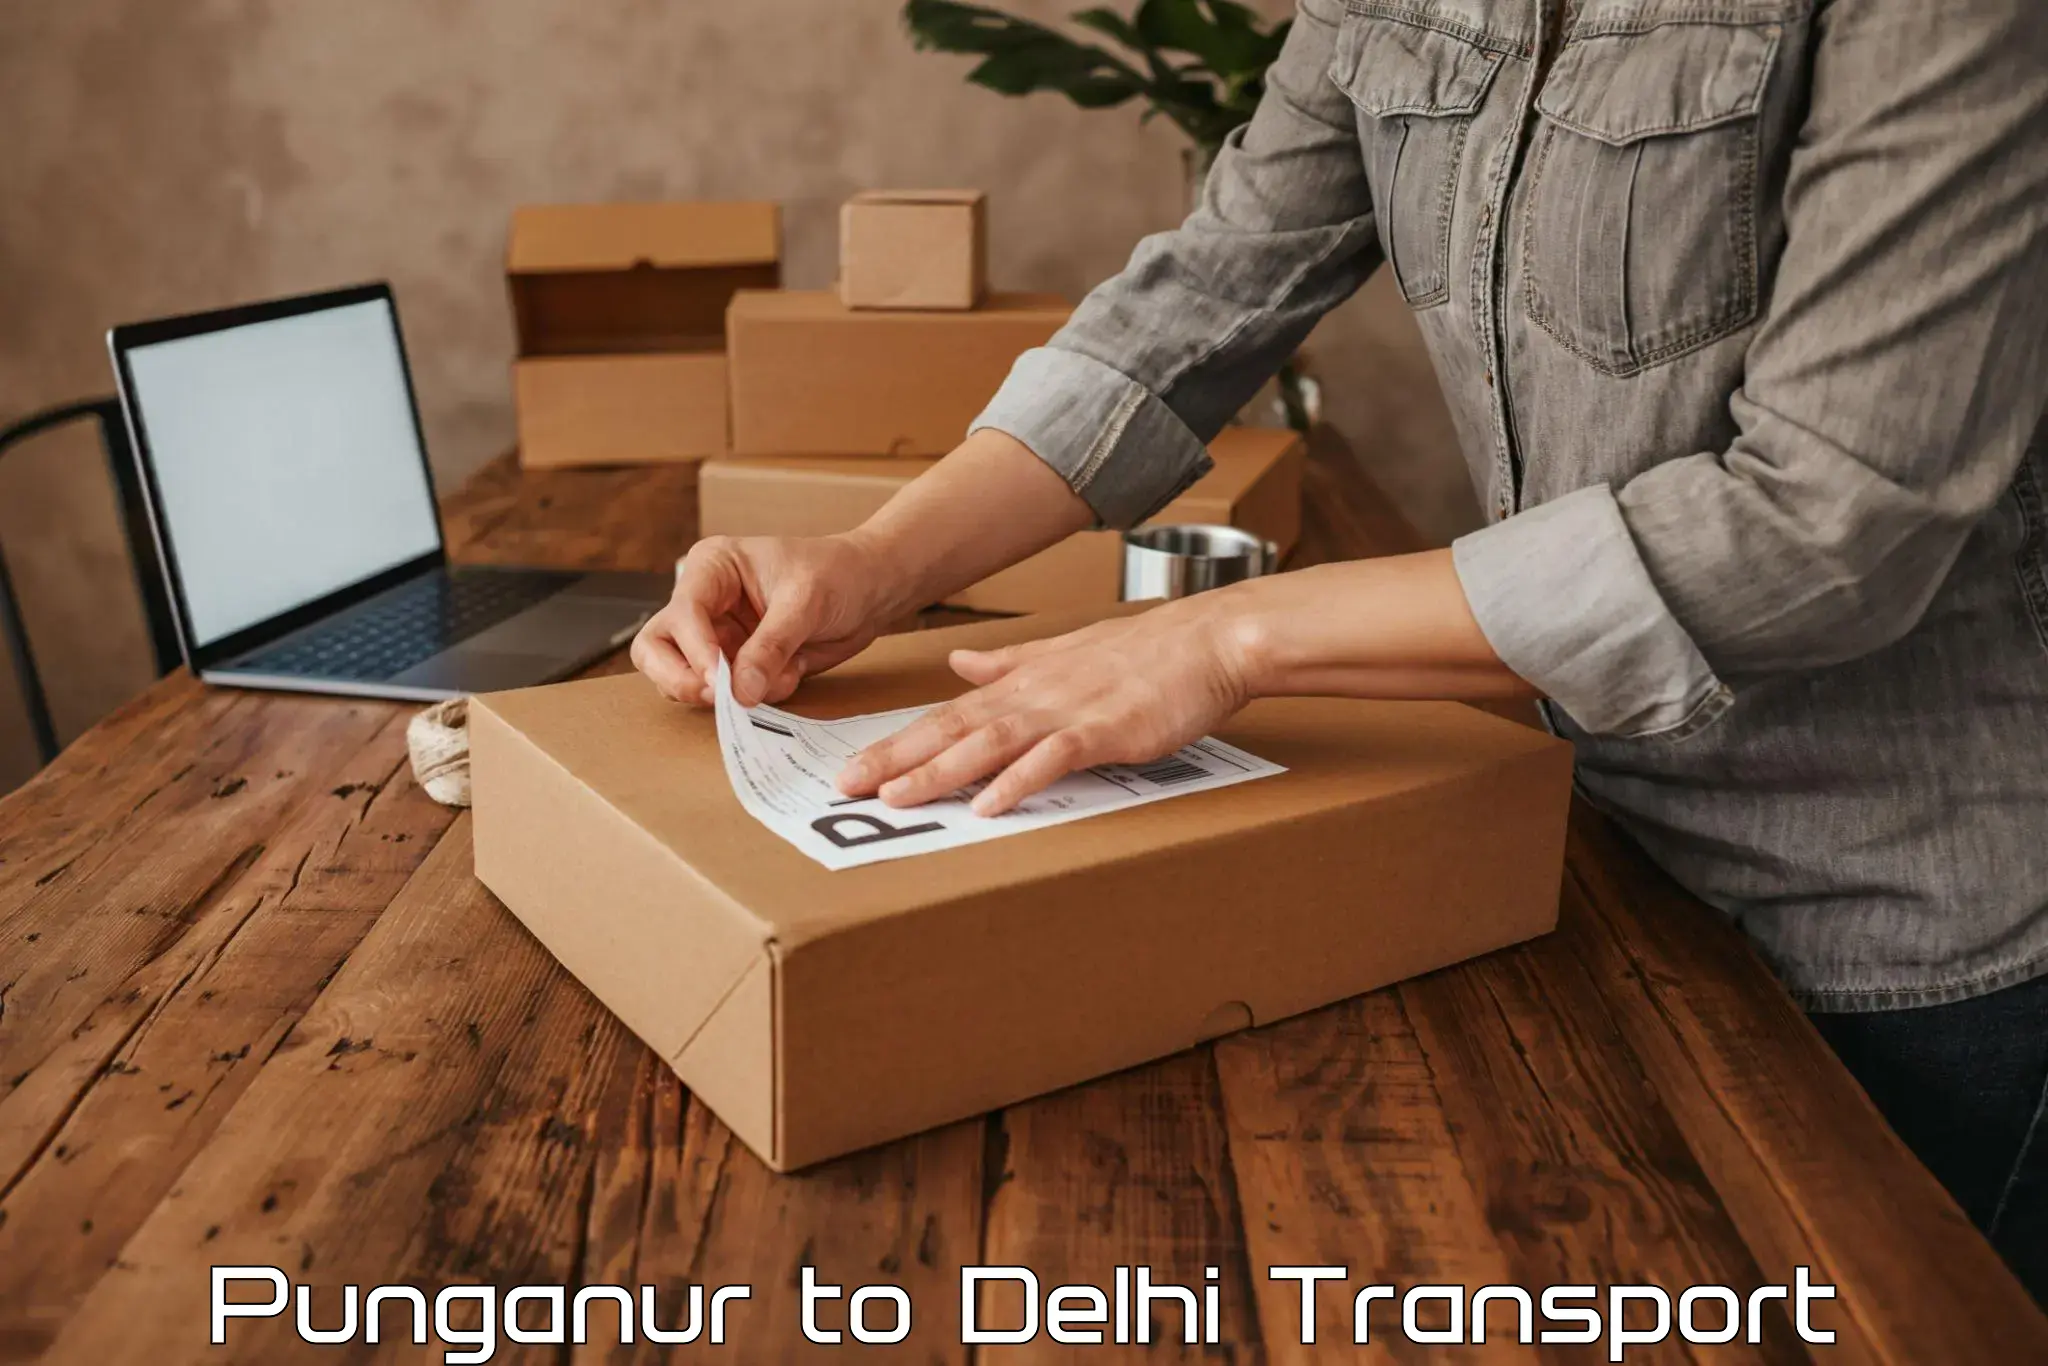 Daily transport service Punganur to Delhi